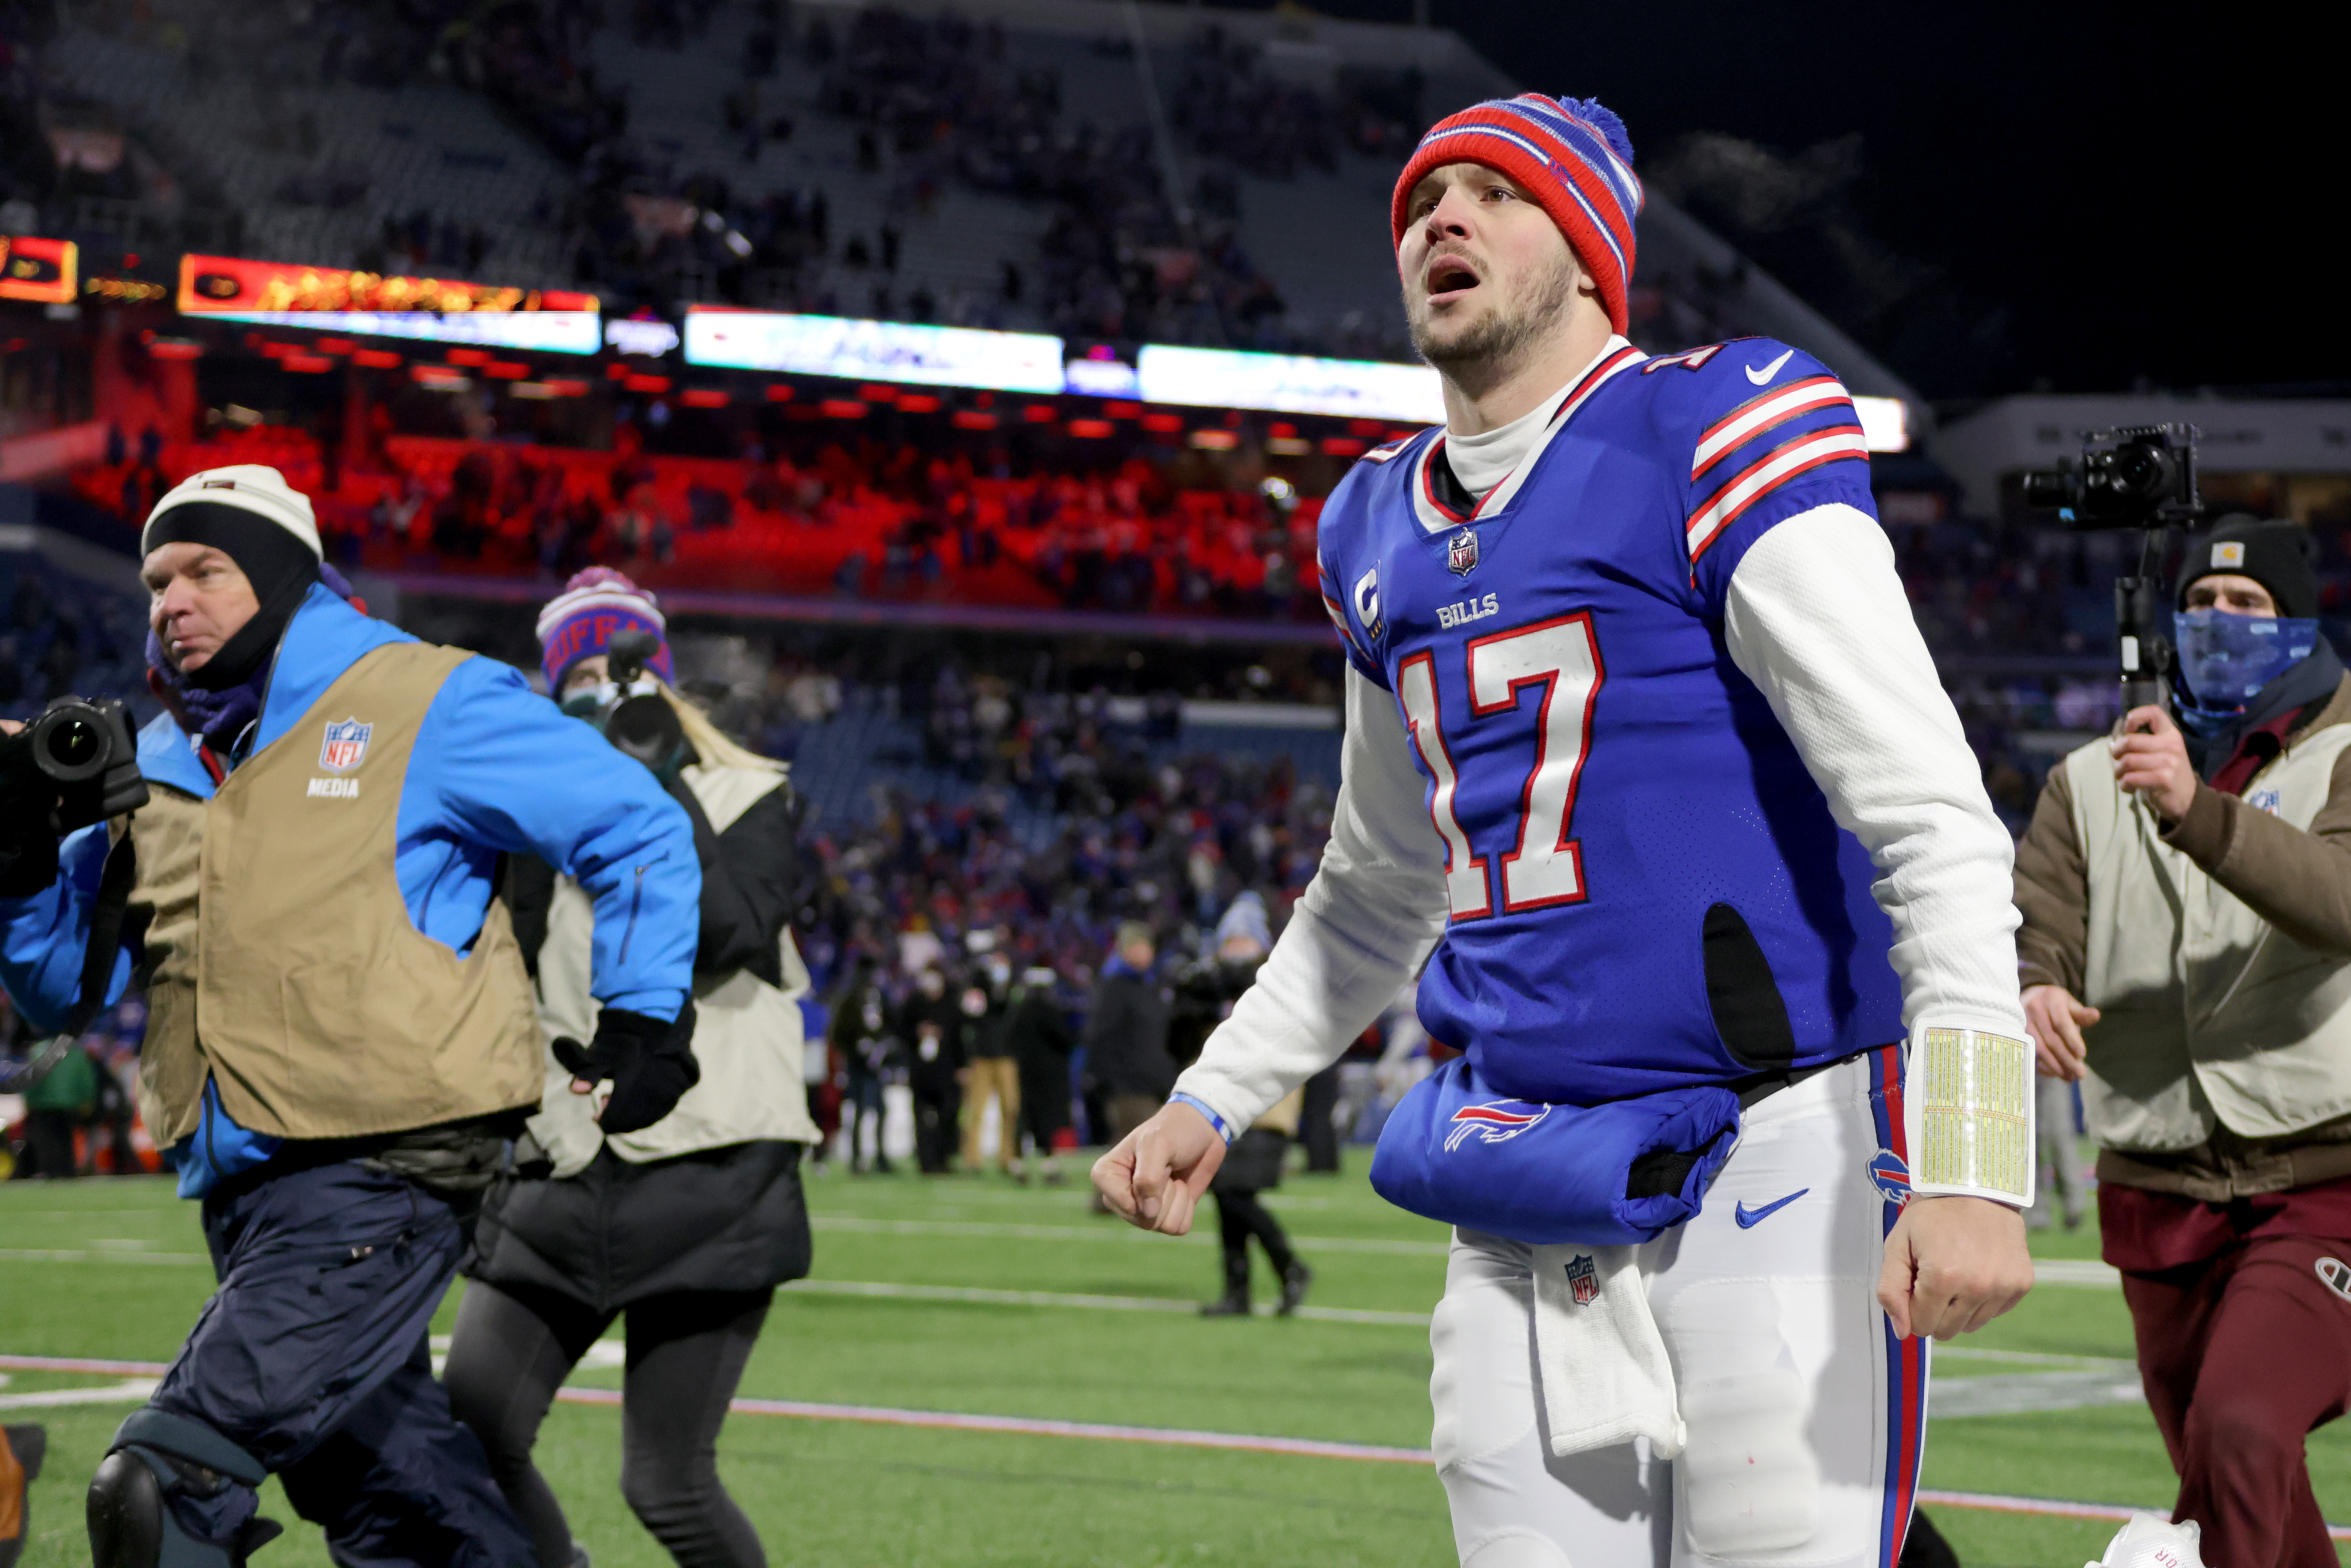 Josh Allen #17 of the Buffalo Bills walks off the field after defeating the New England Patriots with a score of 47 to 17 in the AFC Wild Card playoff game at Highmark Stadium on January 15, 2022 in Buffalo, New York.